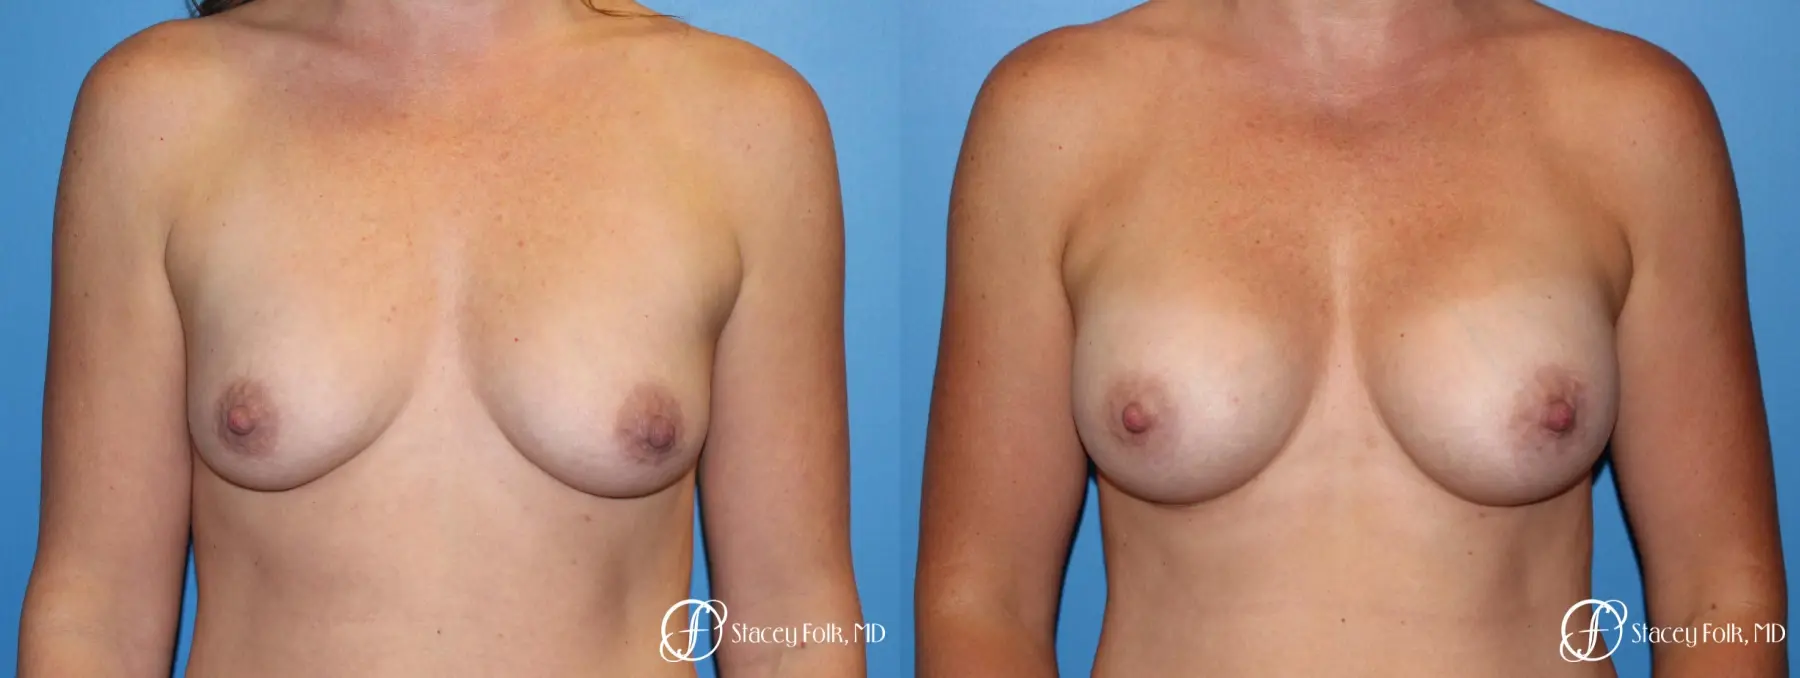 Denver Breast augmentation using Sientra textured anatomic implants 5578 - Before and After